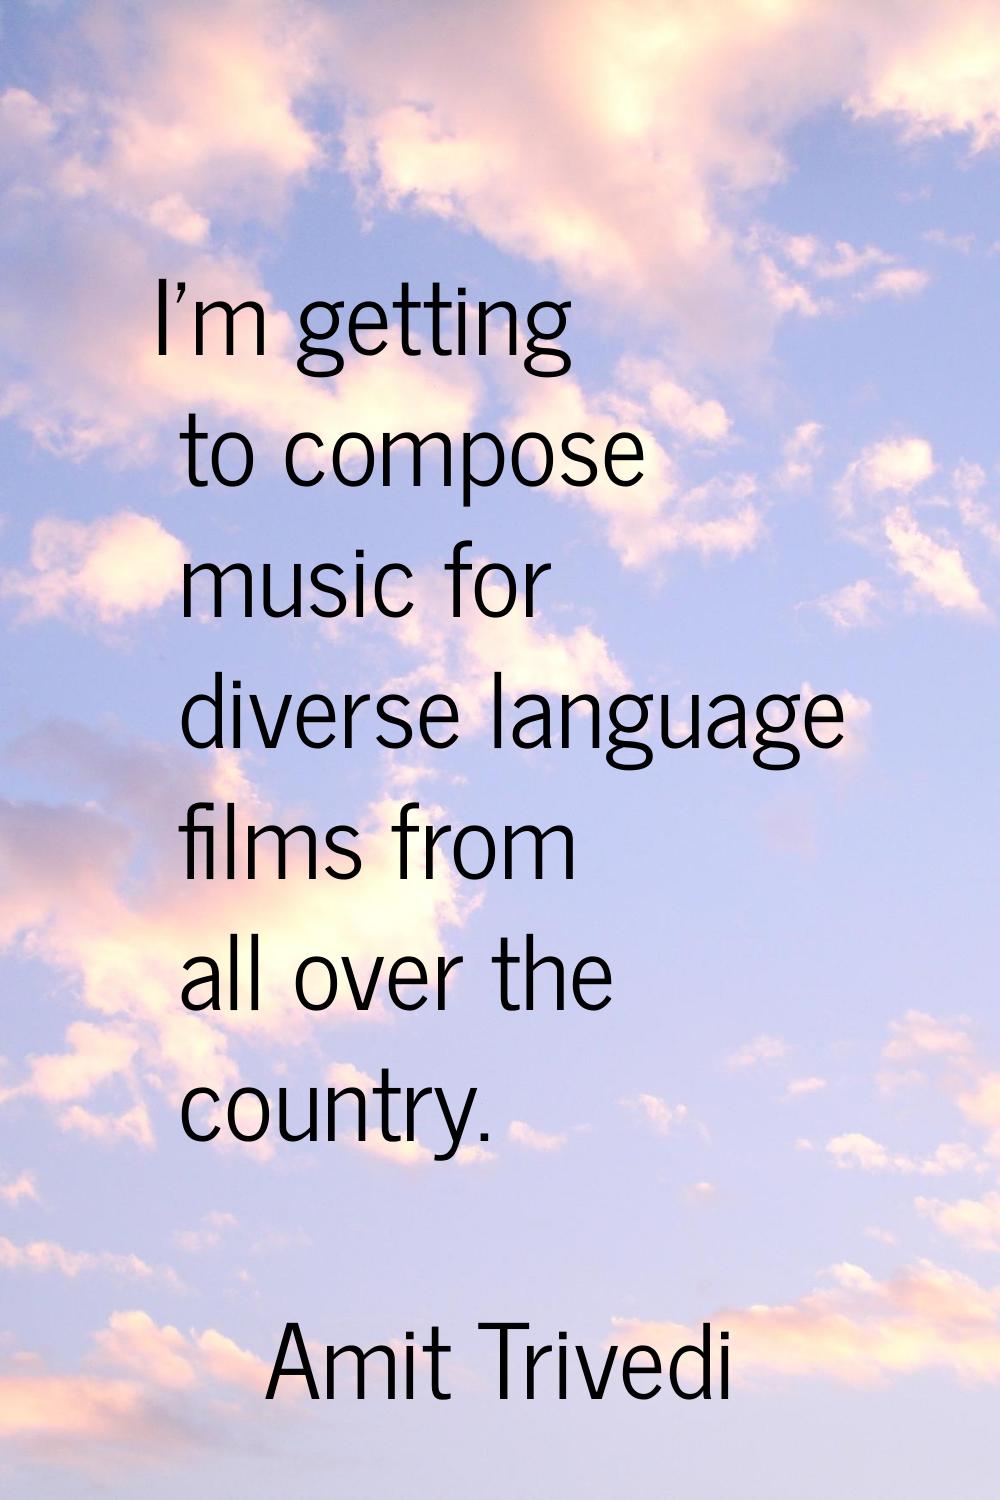 I'm getting to compose music for diverse language films from all over the country.